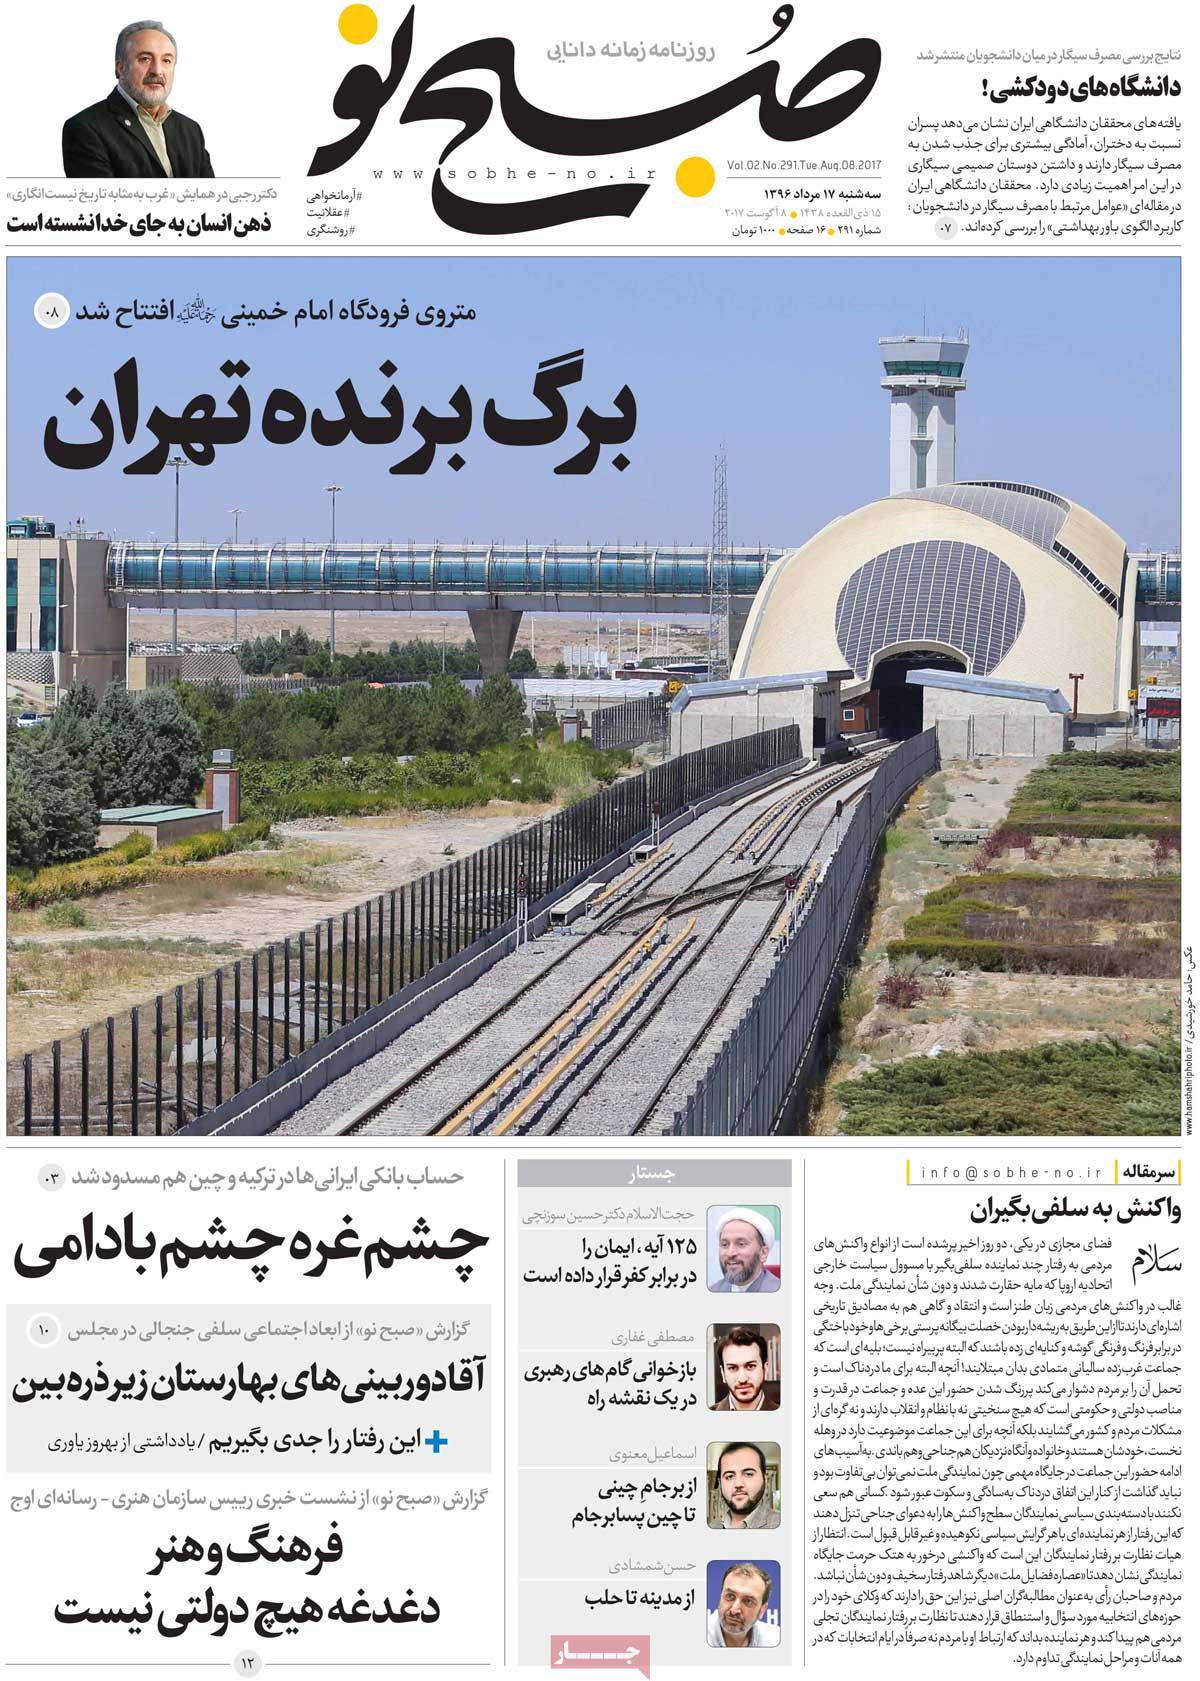 A Look at Iranian Newspaper Front Pages on August 8 - sobheno